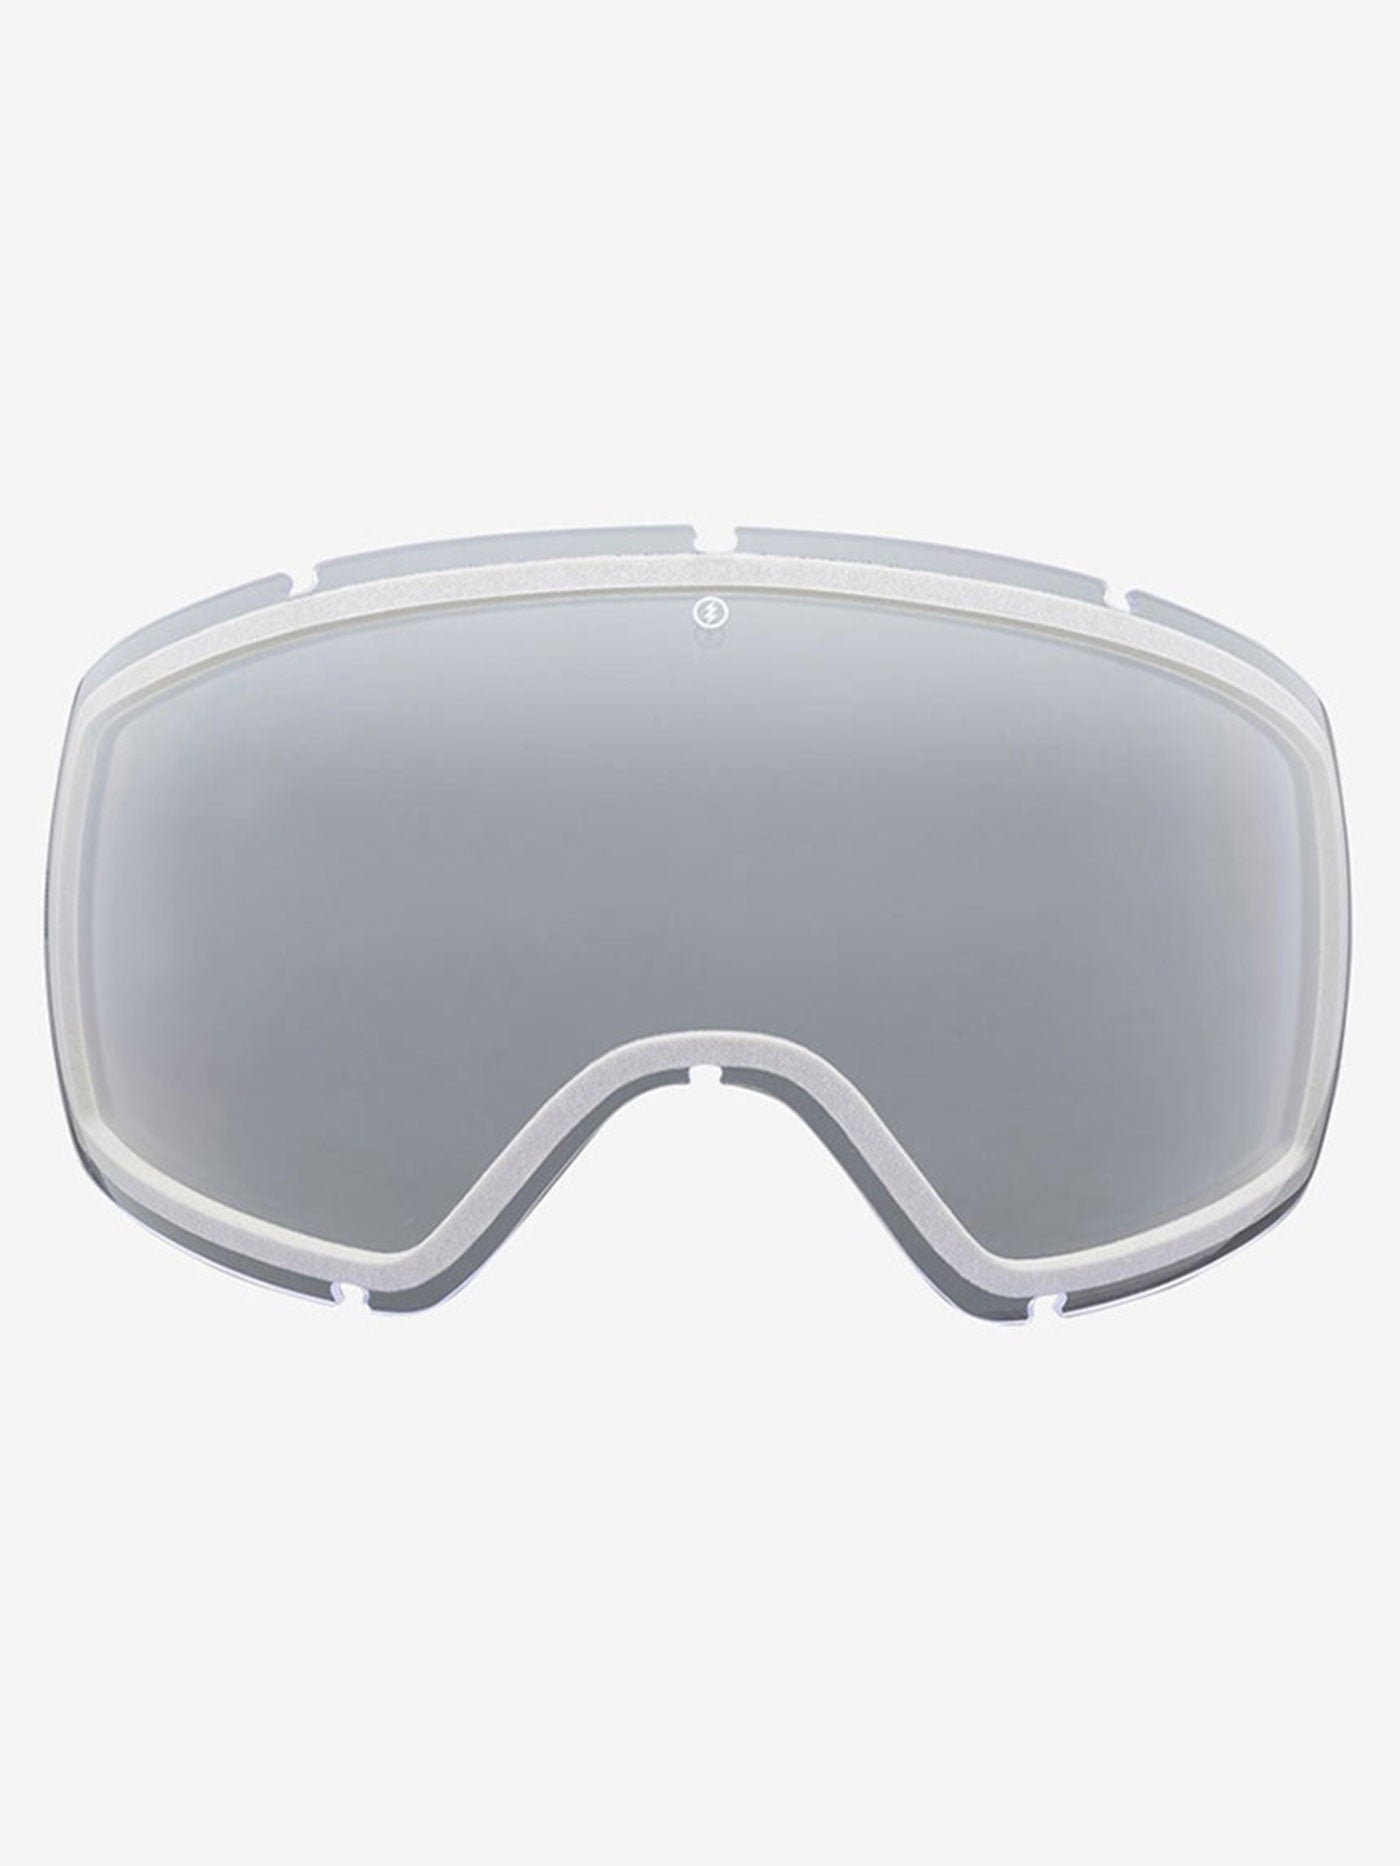 Electric EG2-T.S Snowboard Goggle Lens